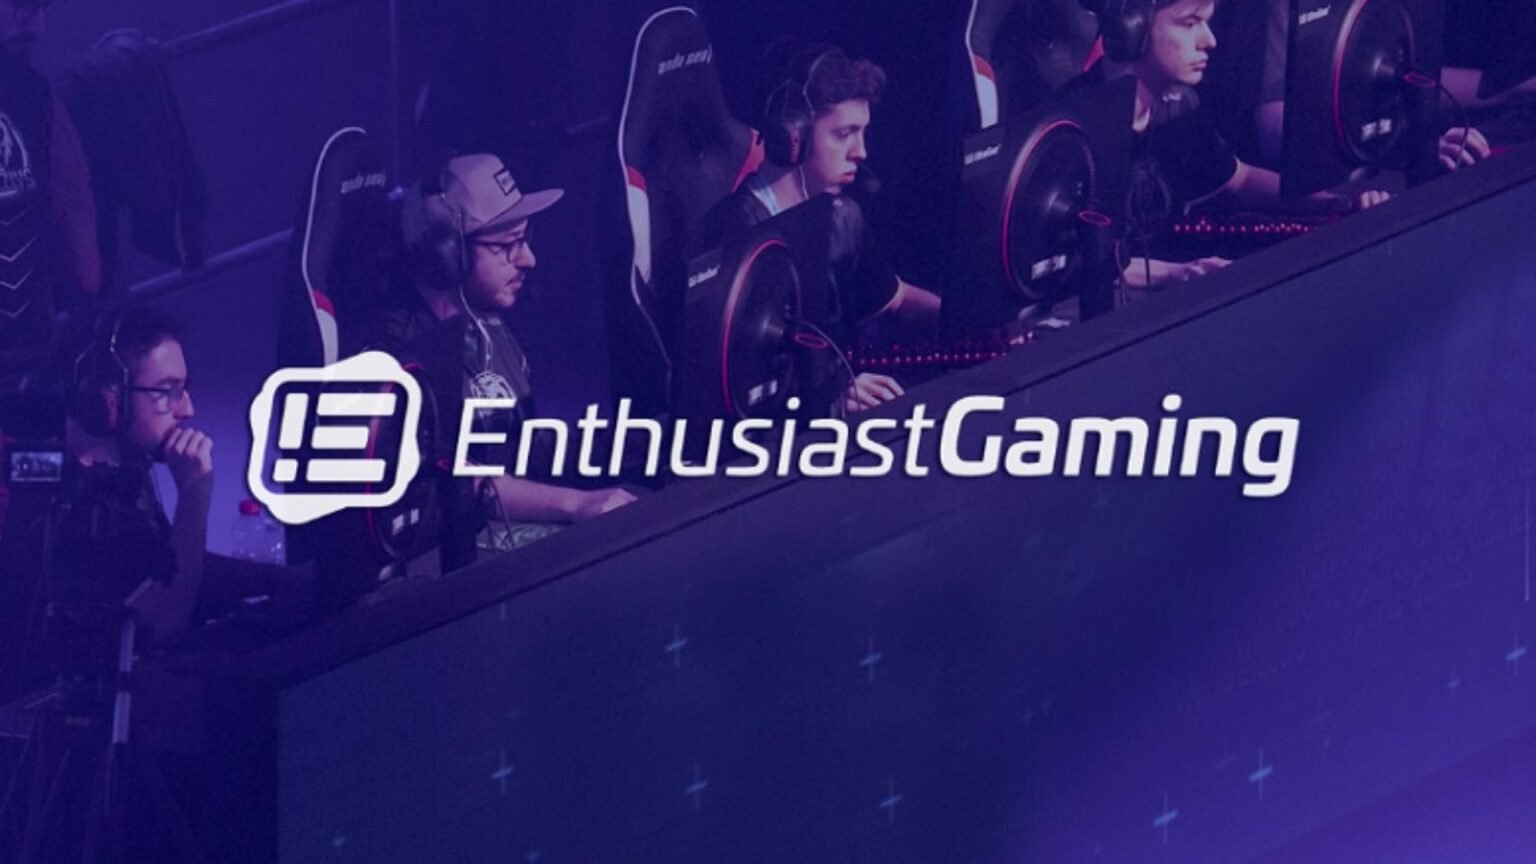 GAMURS Group acquires enthusiast gaming sites.